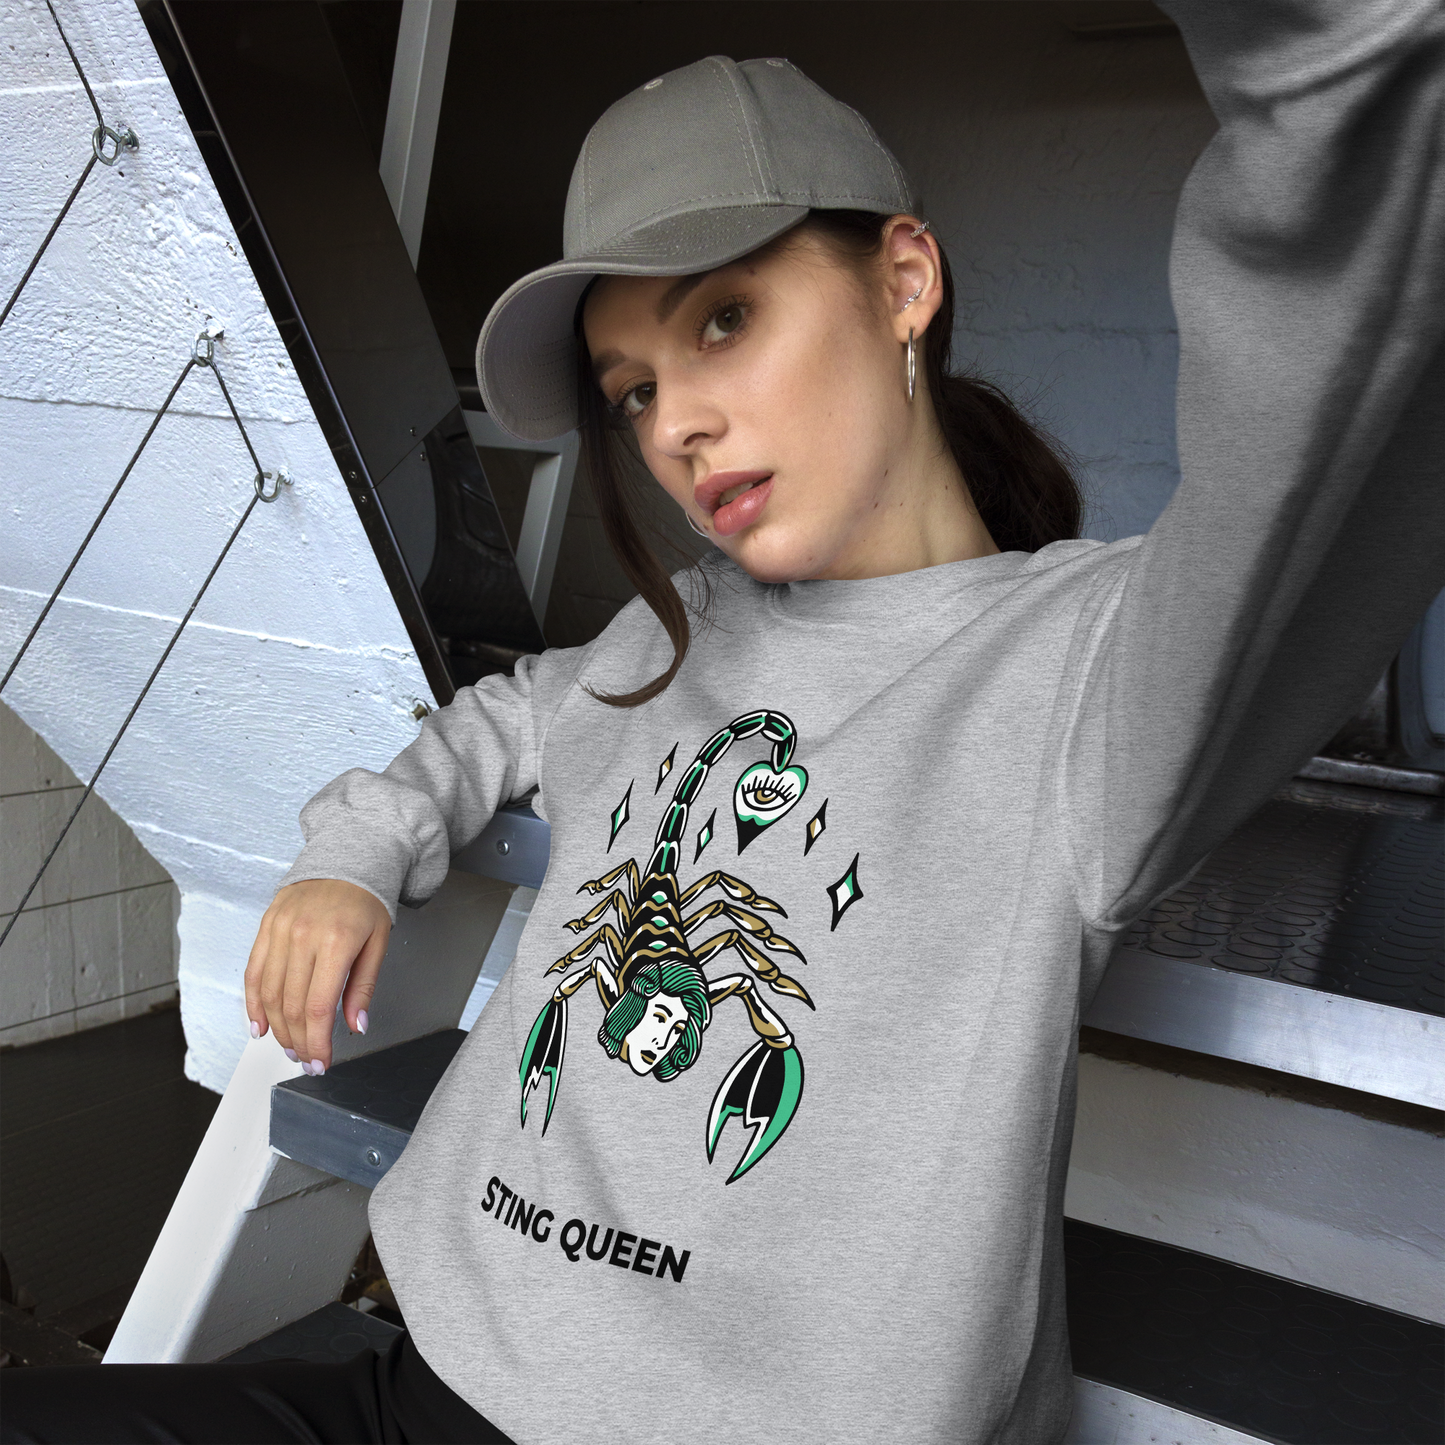 Woman wearing a Sport Grey Scorpion Sweatshirt featuring the Sting Queen graphic on the chest - Cool Graphic Scorpion Sweatshirts - Boozy Fox